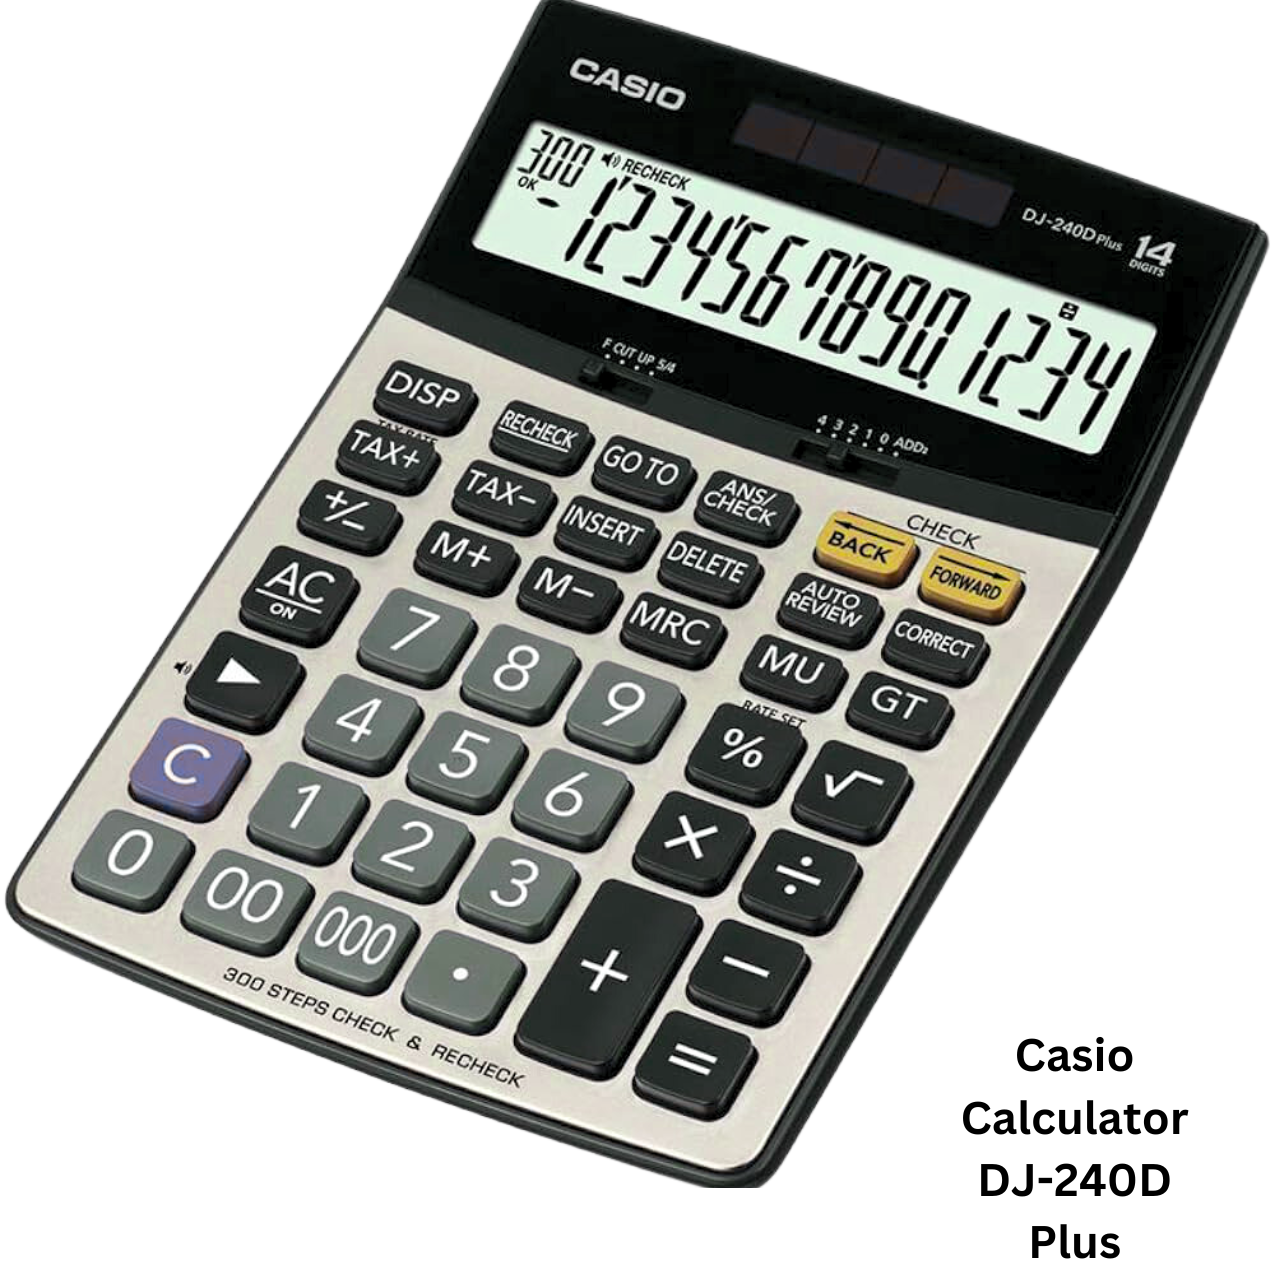 Casio DJ-240D Plus Calculator with large 12-digit display and versatile functions for home or office use